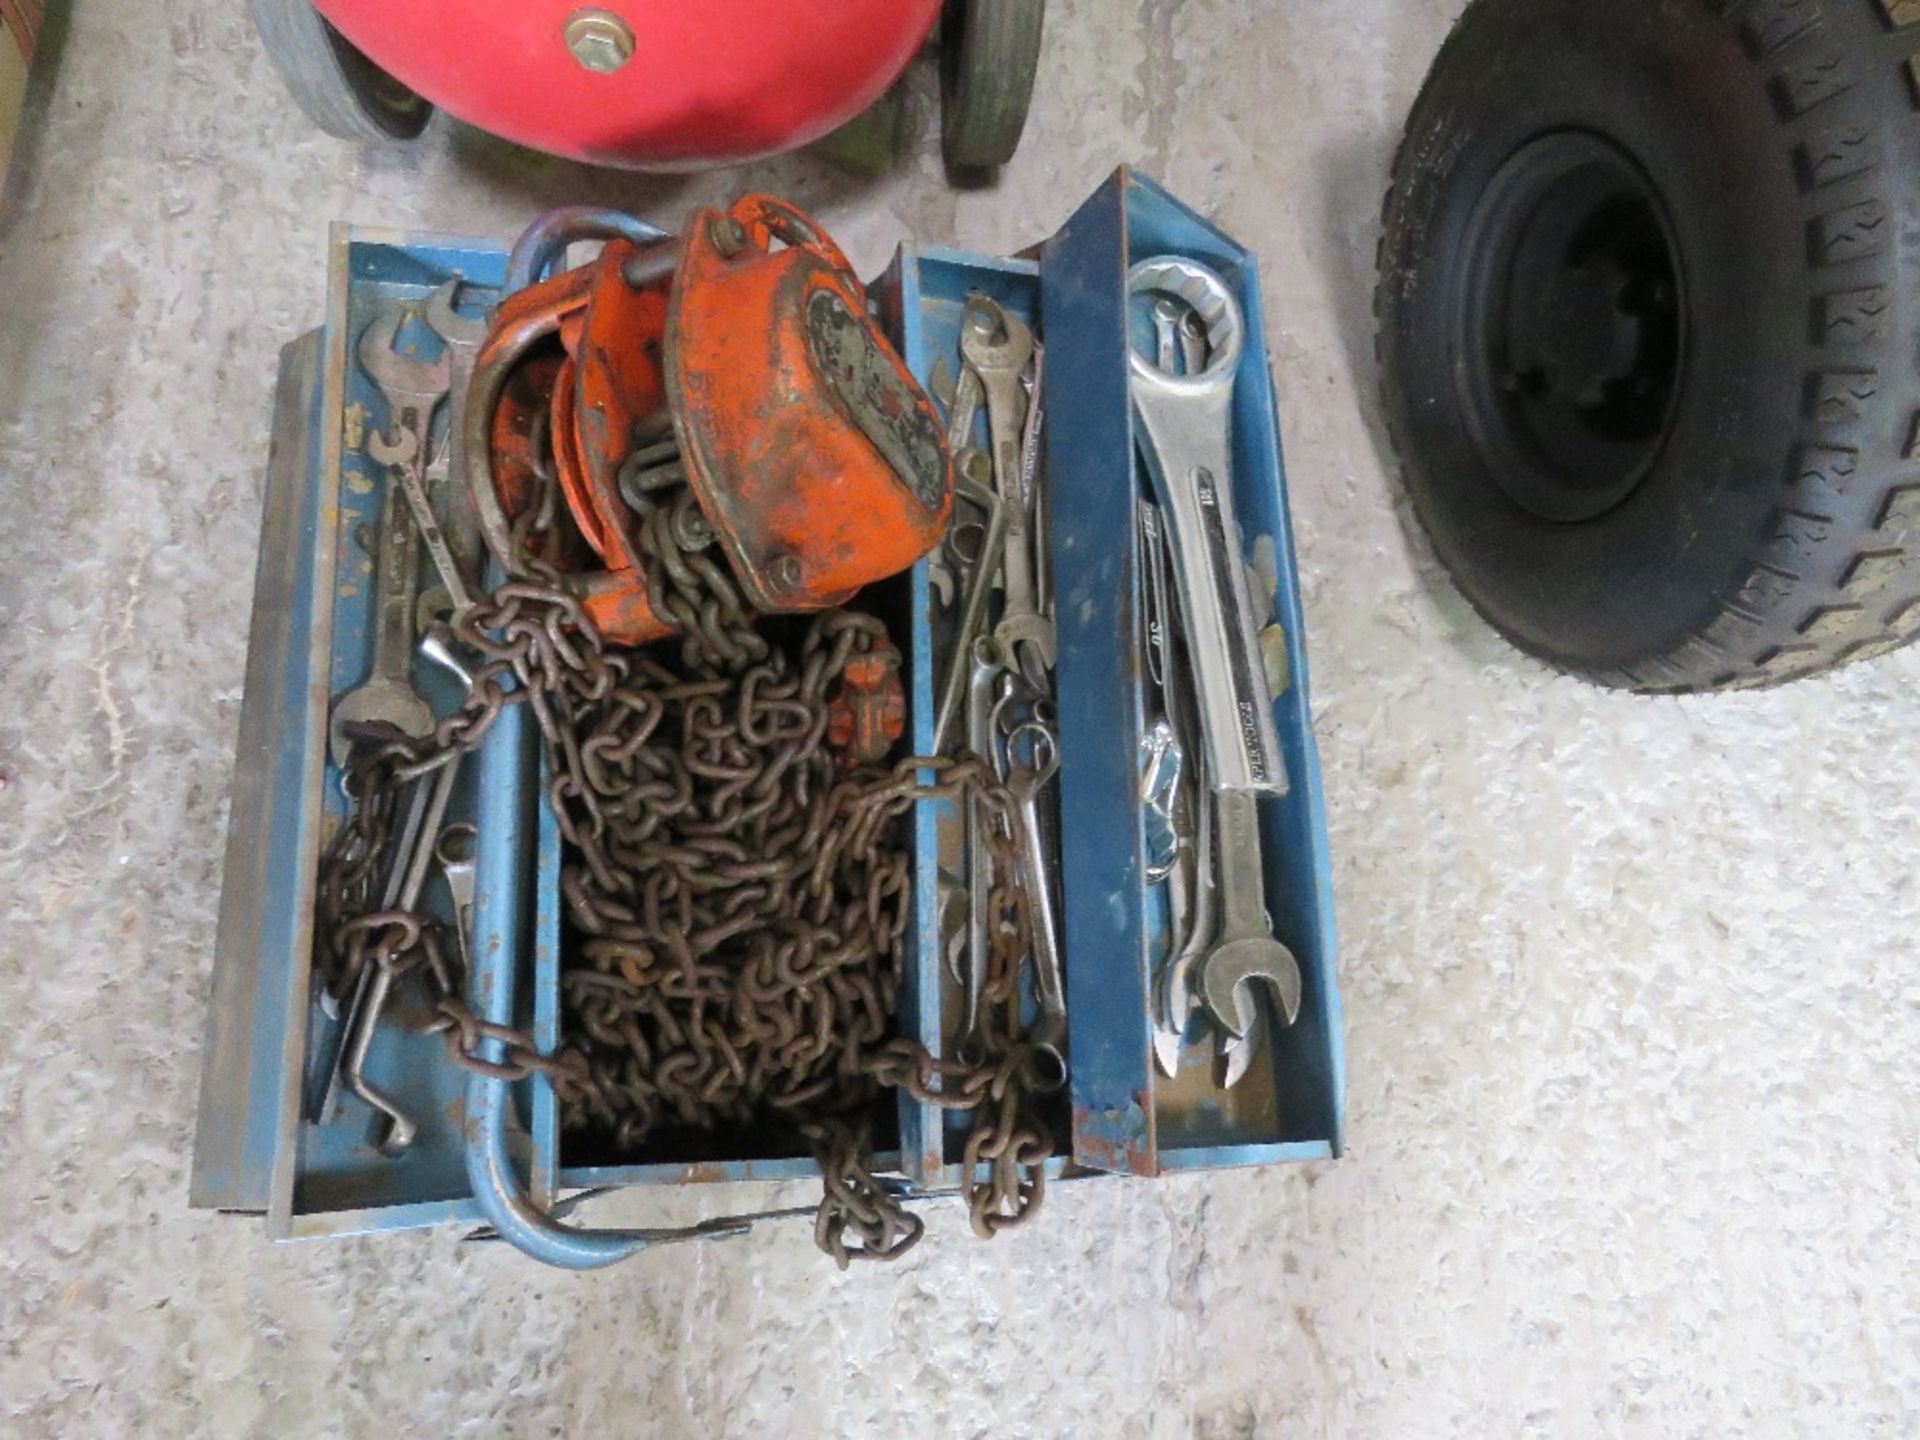 CHAIN HOIST PLUS SPANNERS IN A BOX. THIS LOT IS SOLD UNDER THE AUCTIONEERS MARGIN SCHEME, THEREFORE